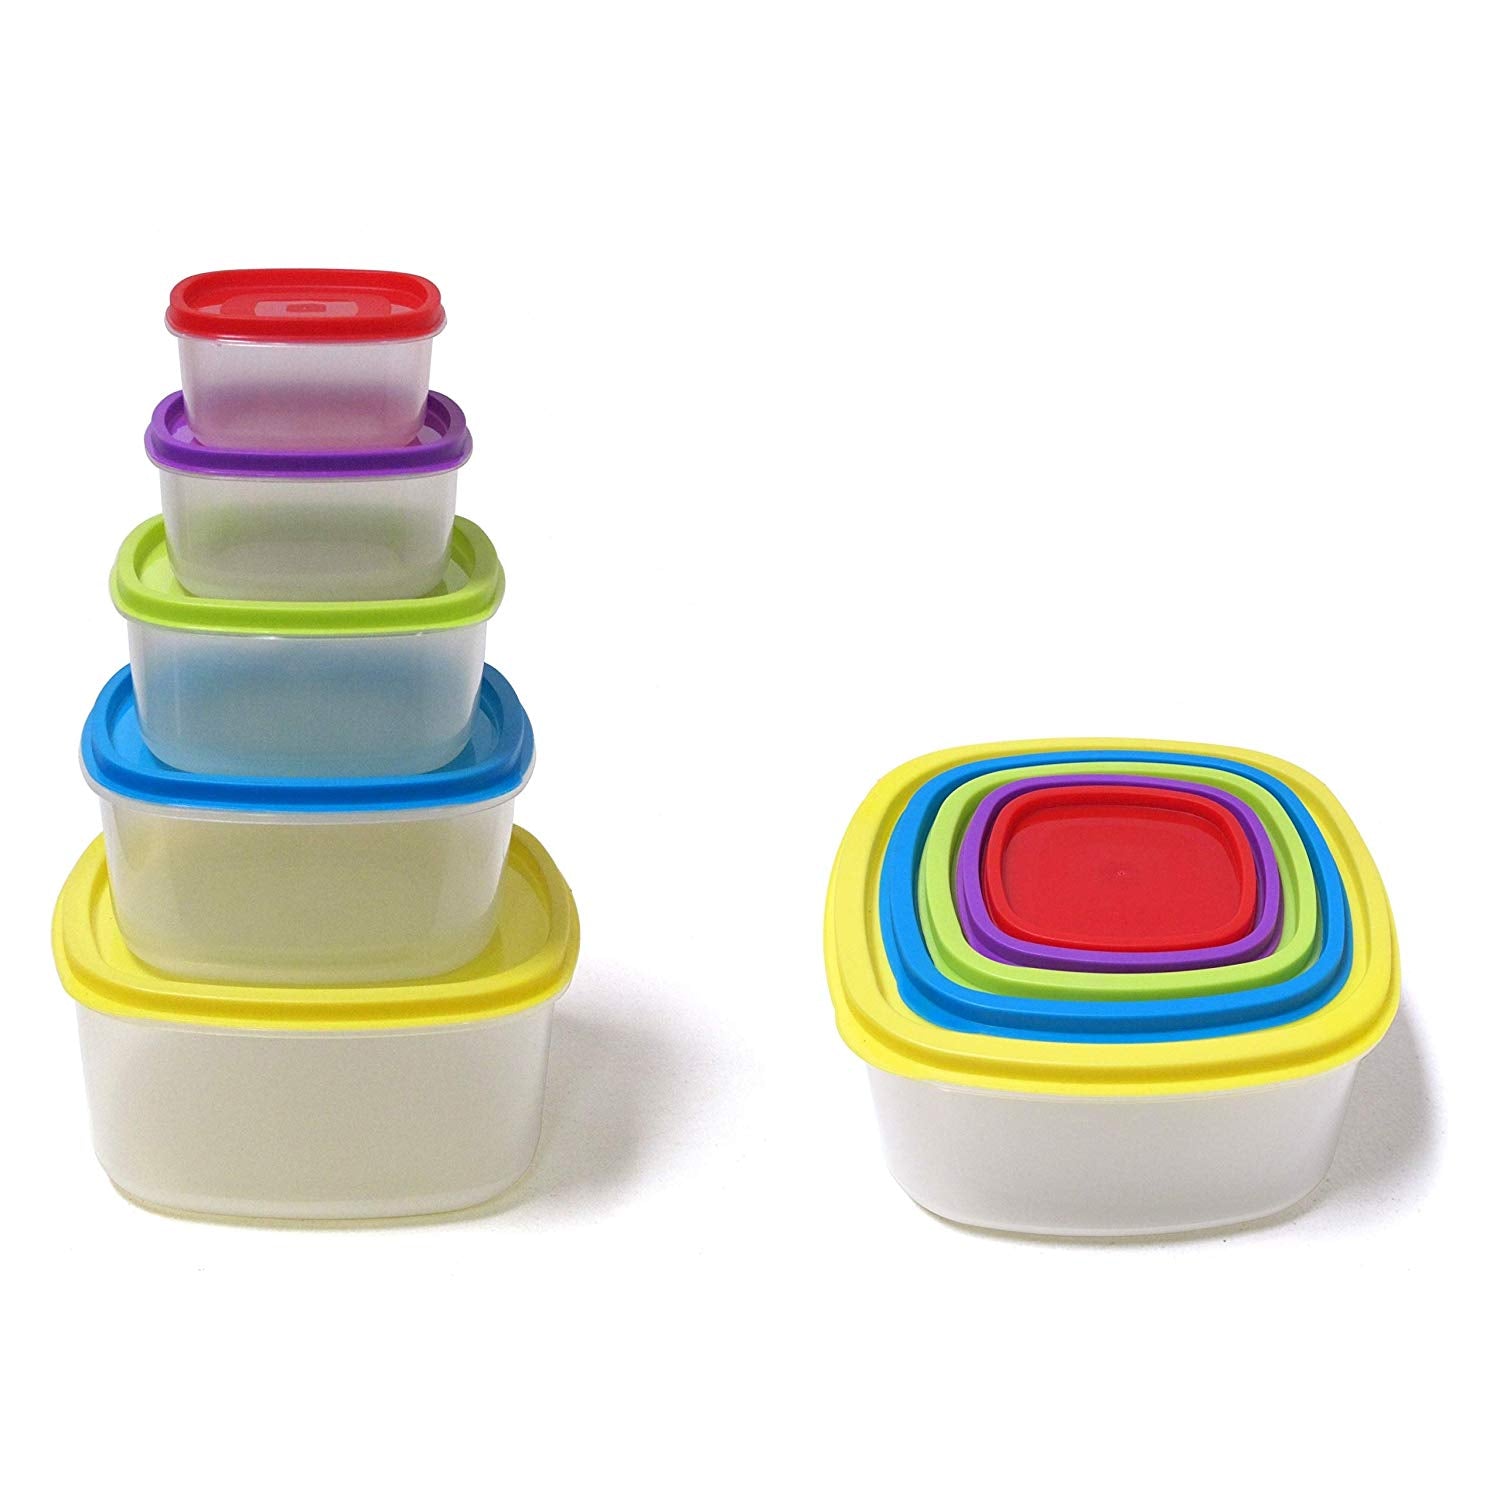 Always Fresh Plastic Food Containers Fiesta Edition Rectangle - 10 pcs Set